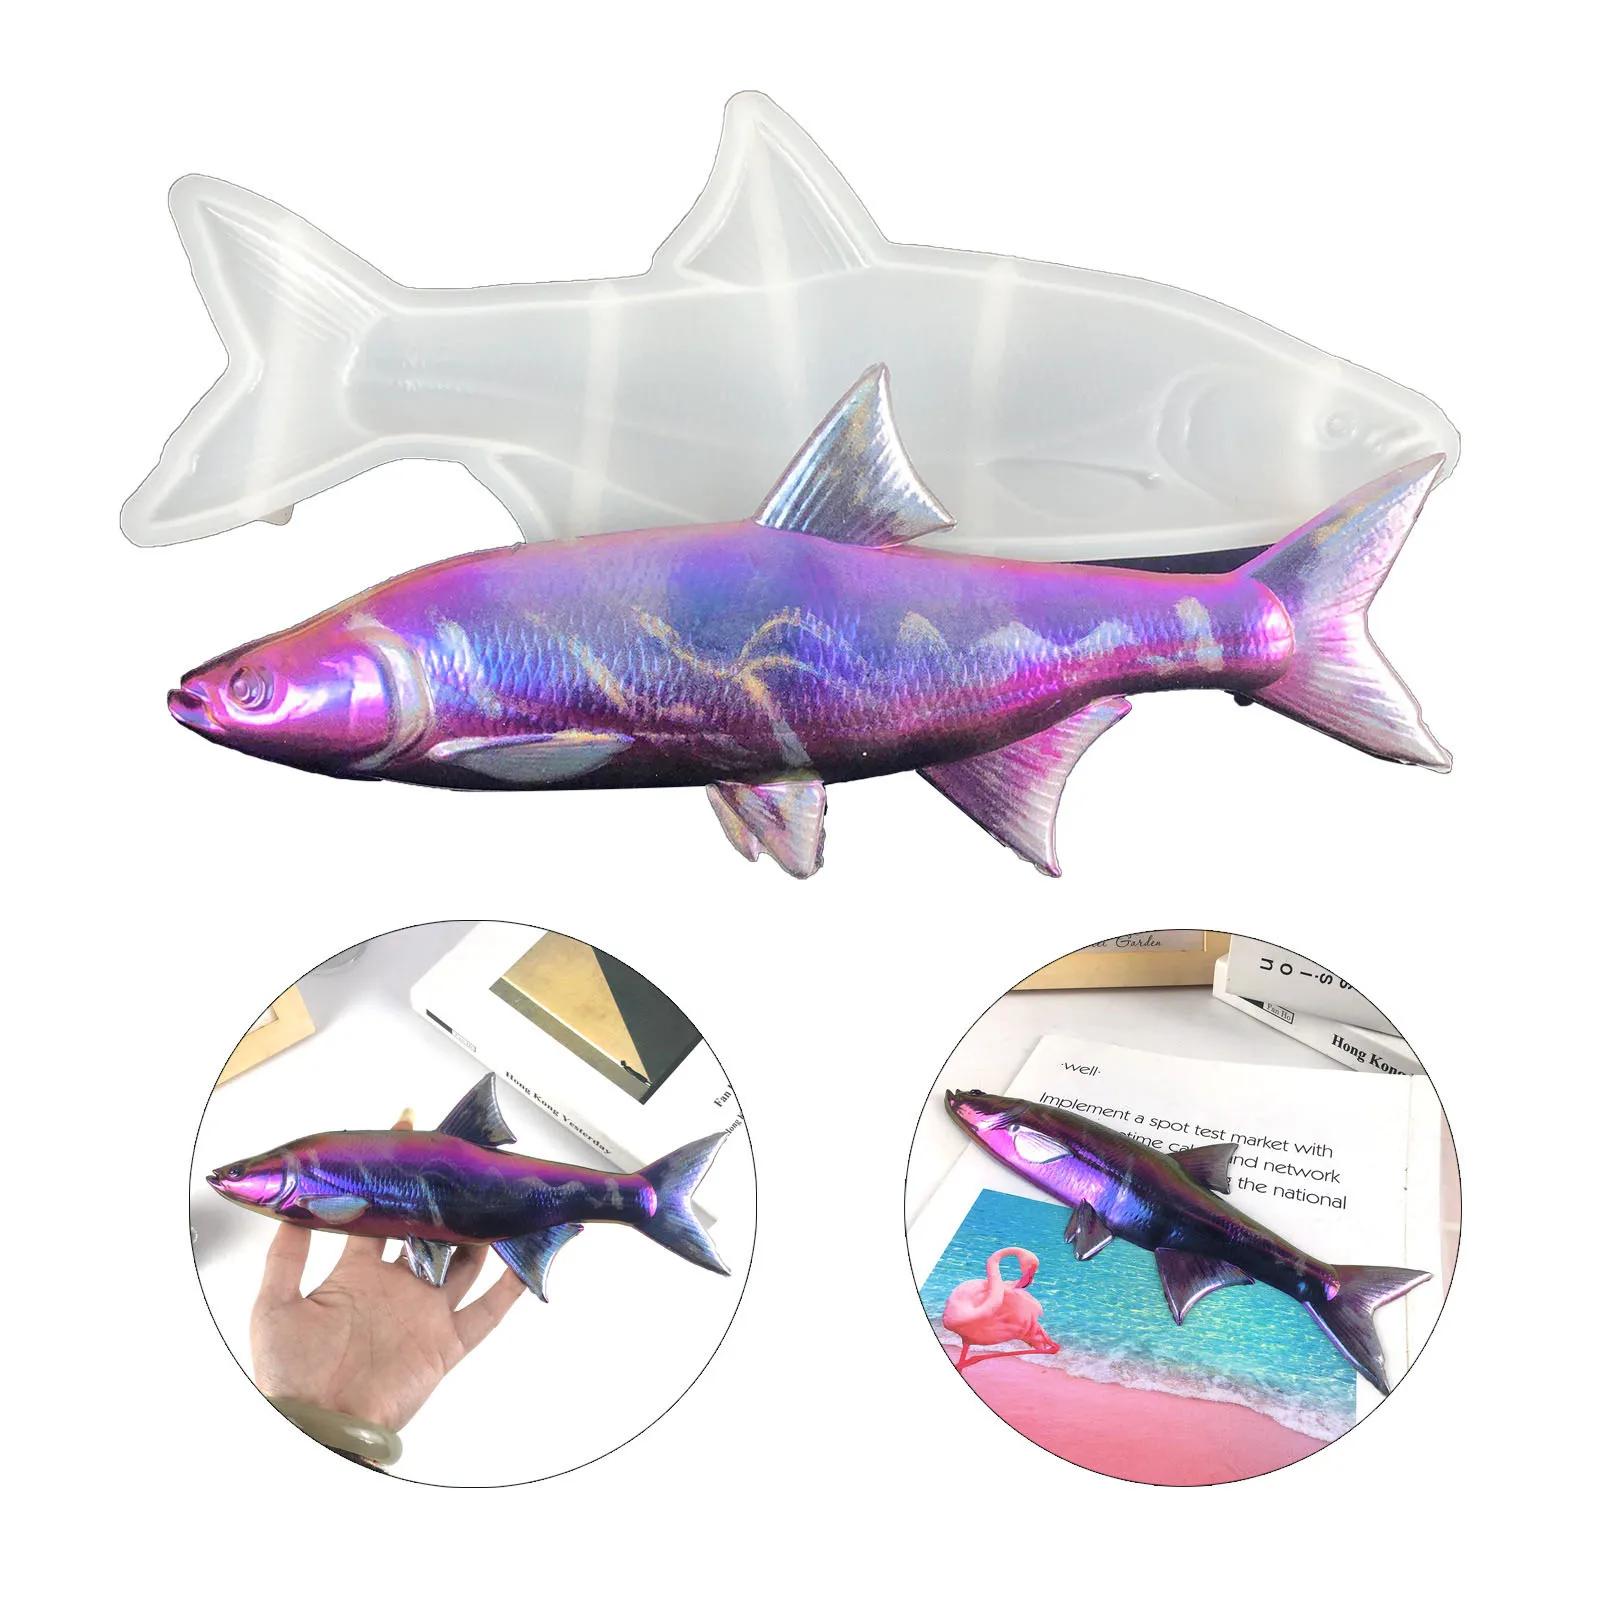 

3D Salmon Fish Casting Silicone Molds Unique Large Ocean Animal Resin Epoxy Casting Mould For DIY Craft Home Wall Art Decoration